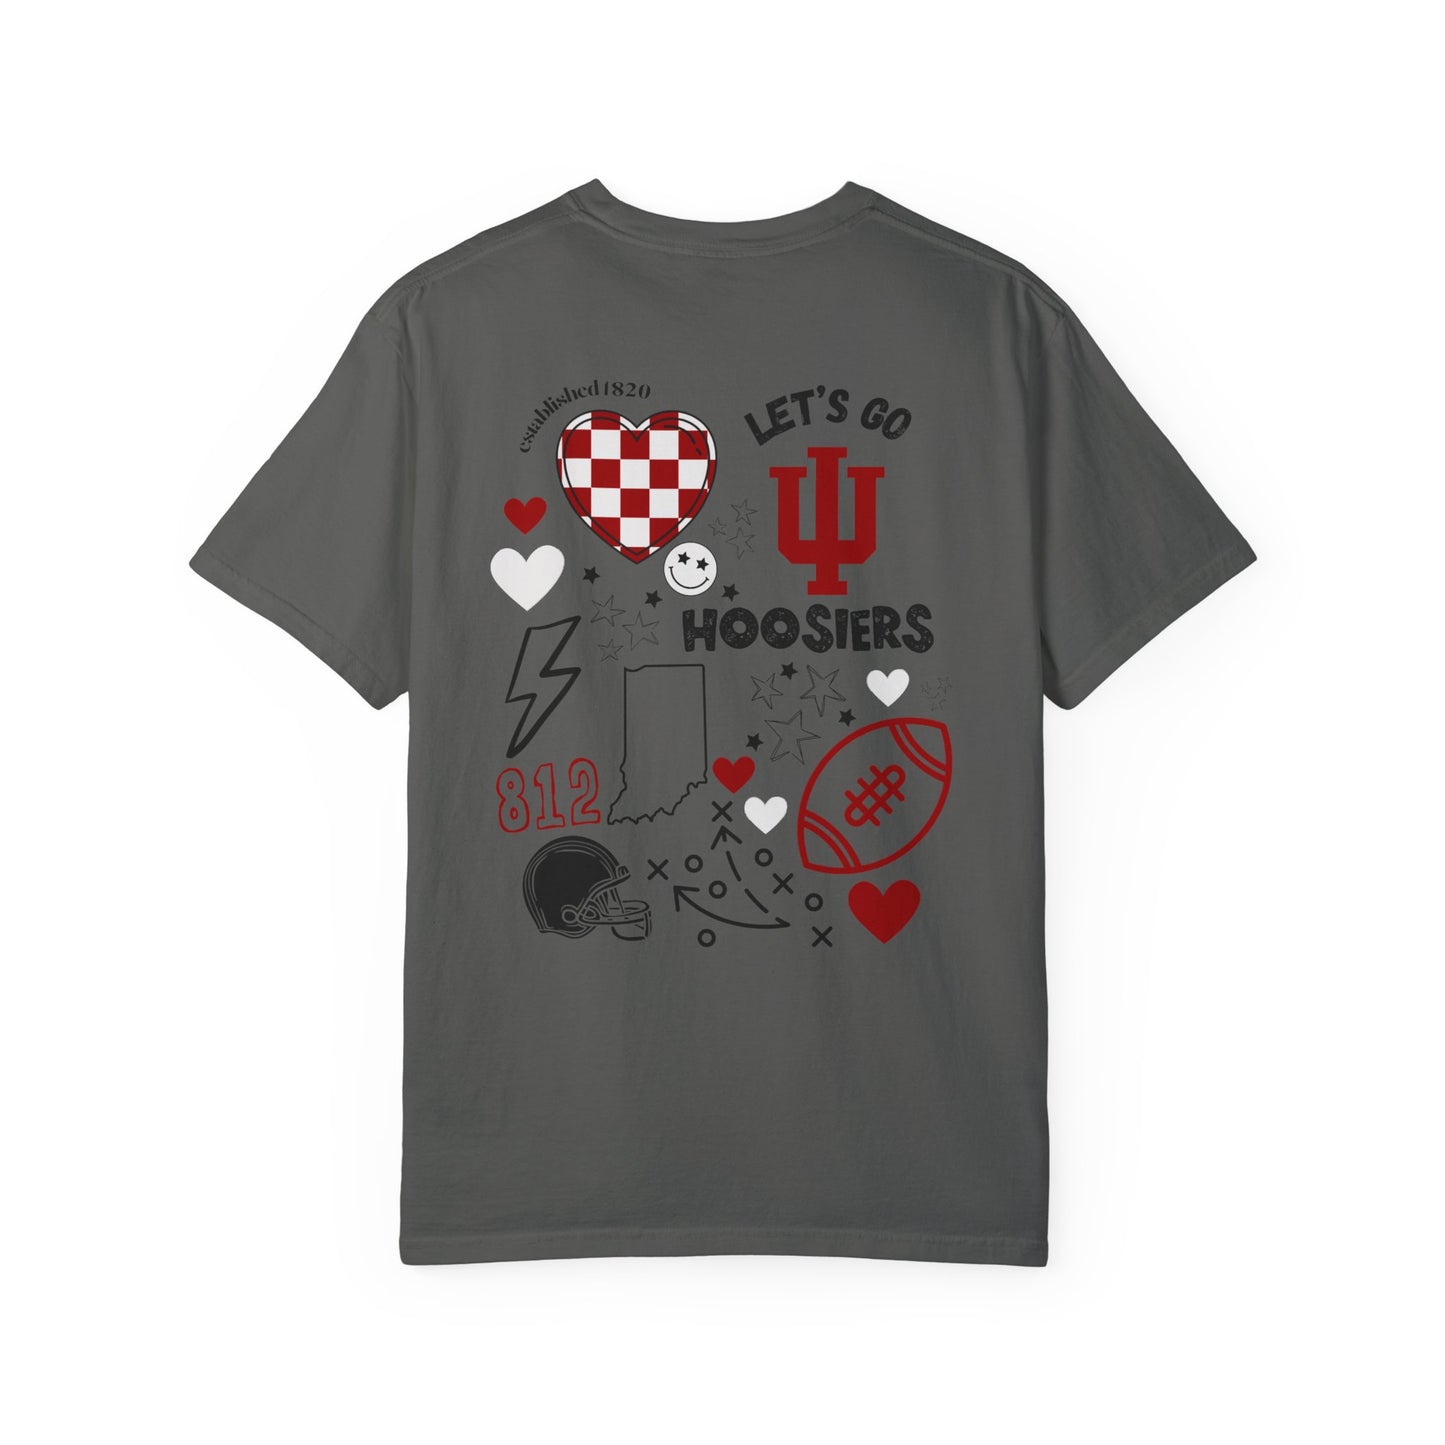 Hoosiers Game Day Shirt